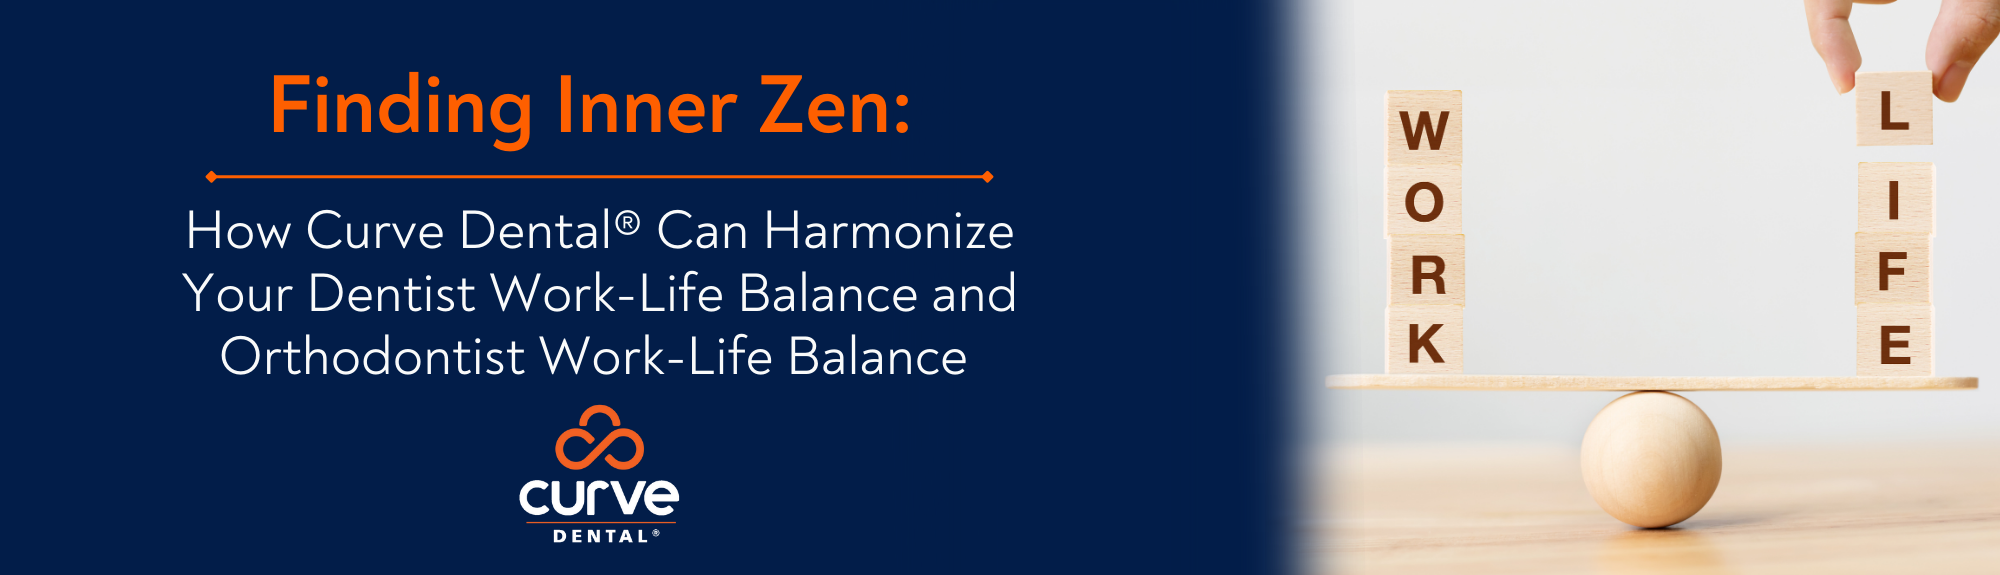 Finding Inner Zen: How Curve Dental Helps Dentists & Orthodontists Achieve Work-Life Balance Harmony